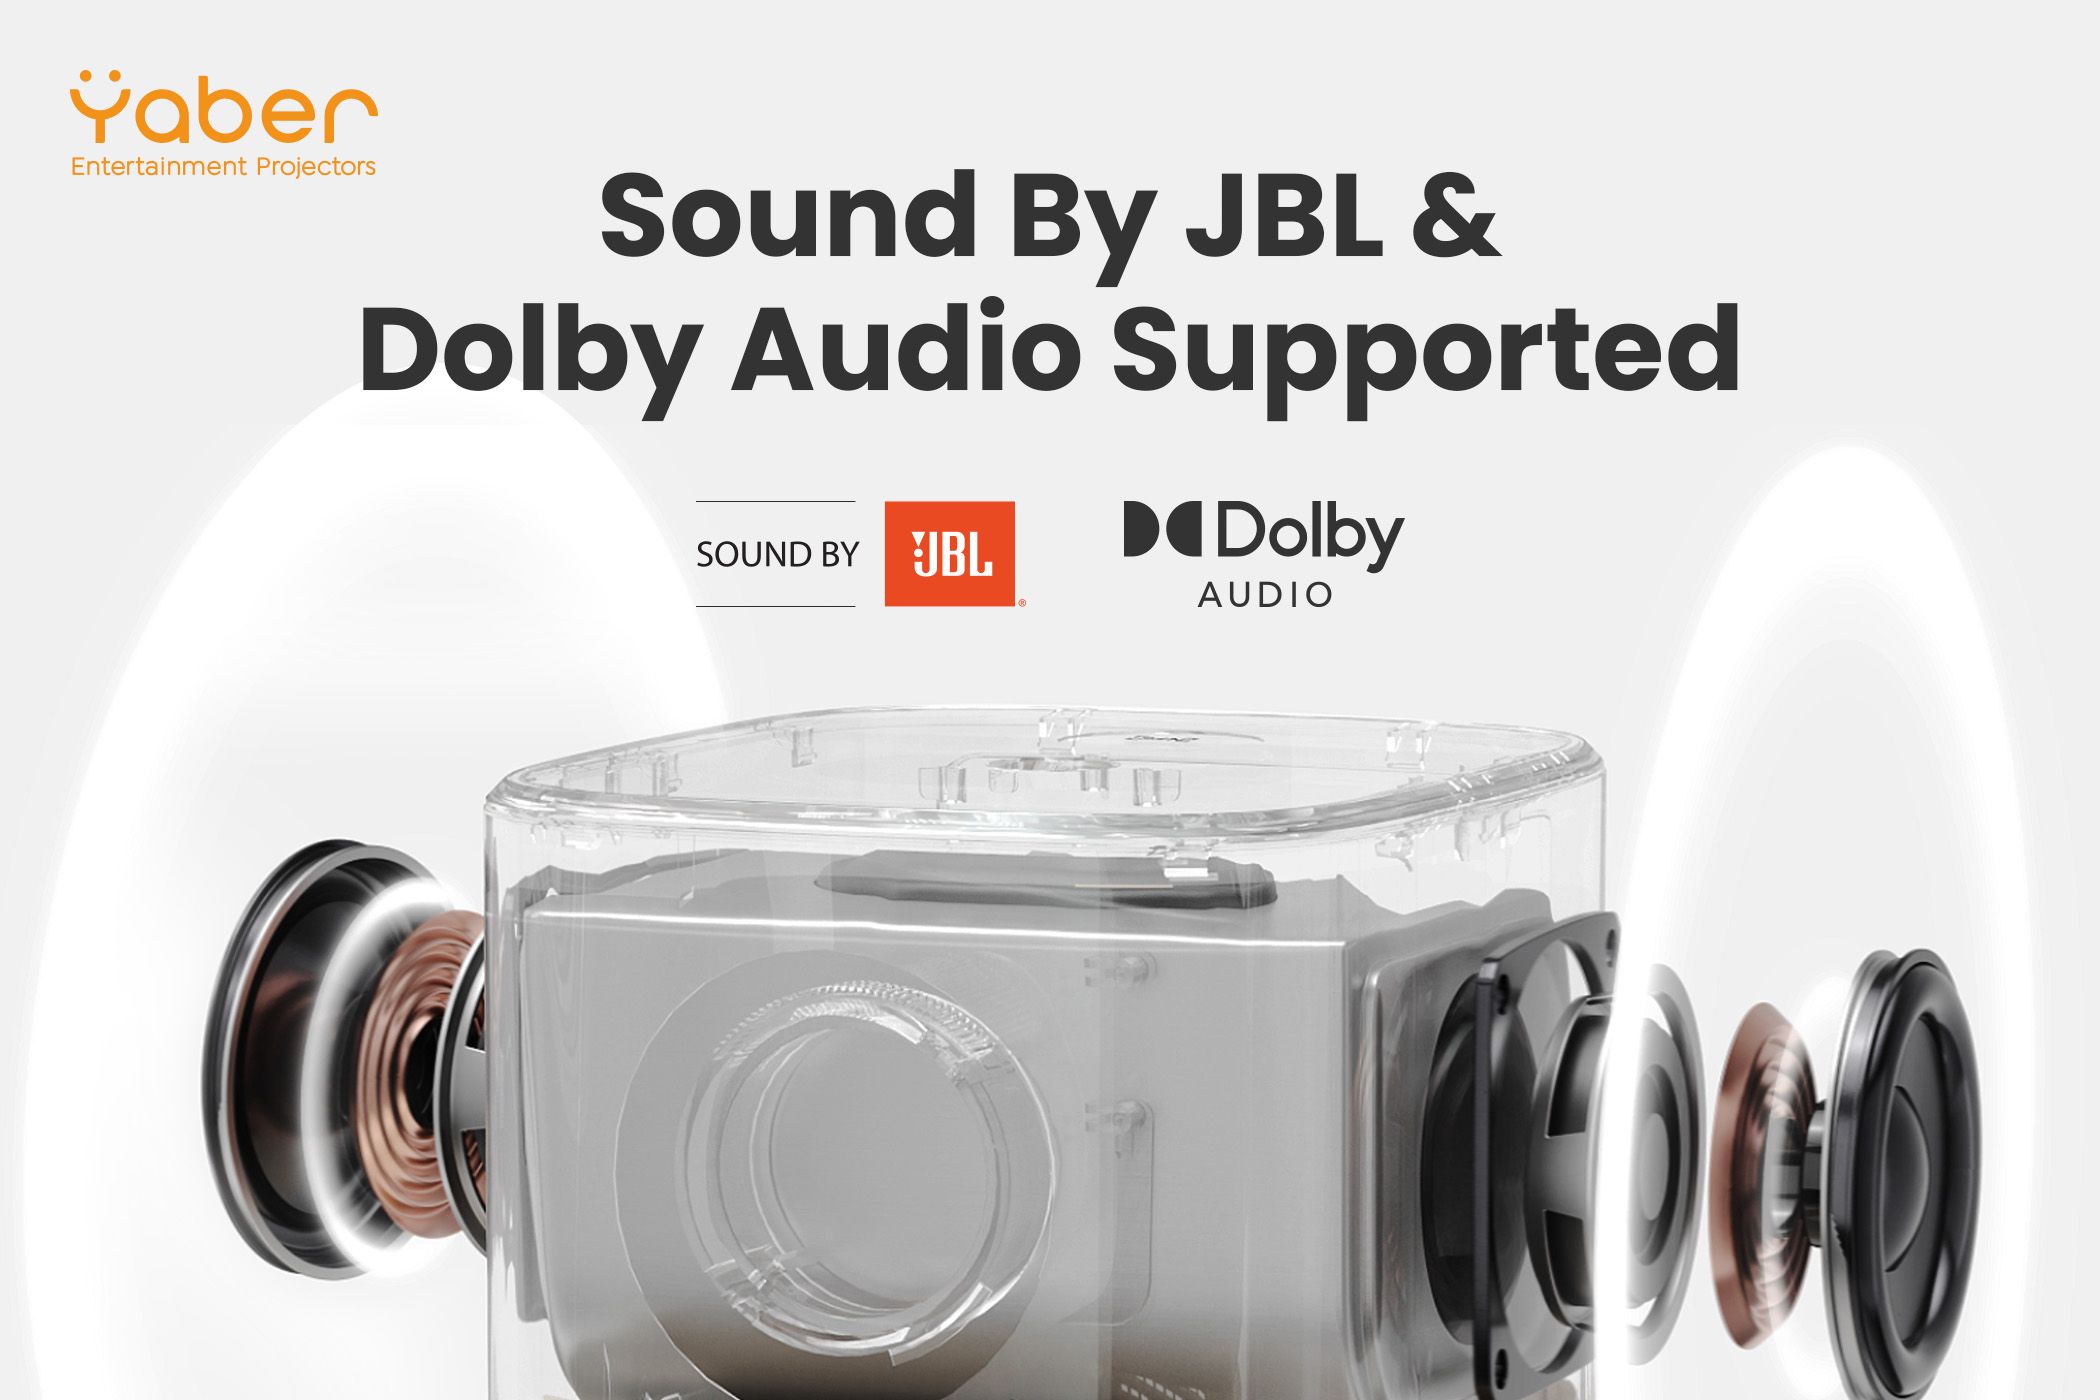 Sound Projection of JBL Speakers in the 2024 Yaber Projector 